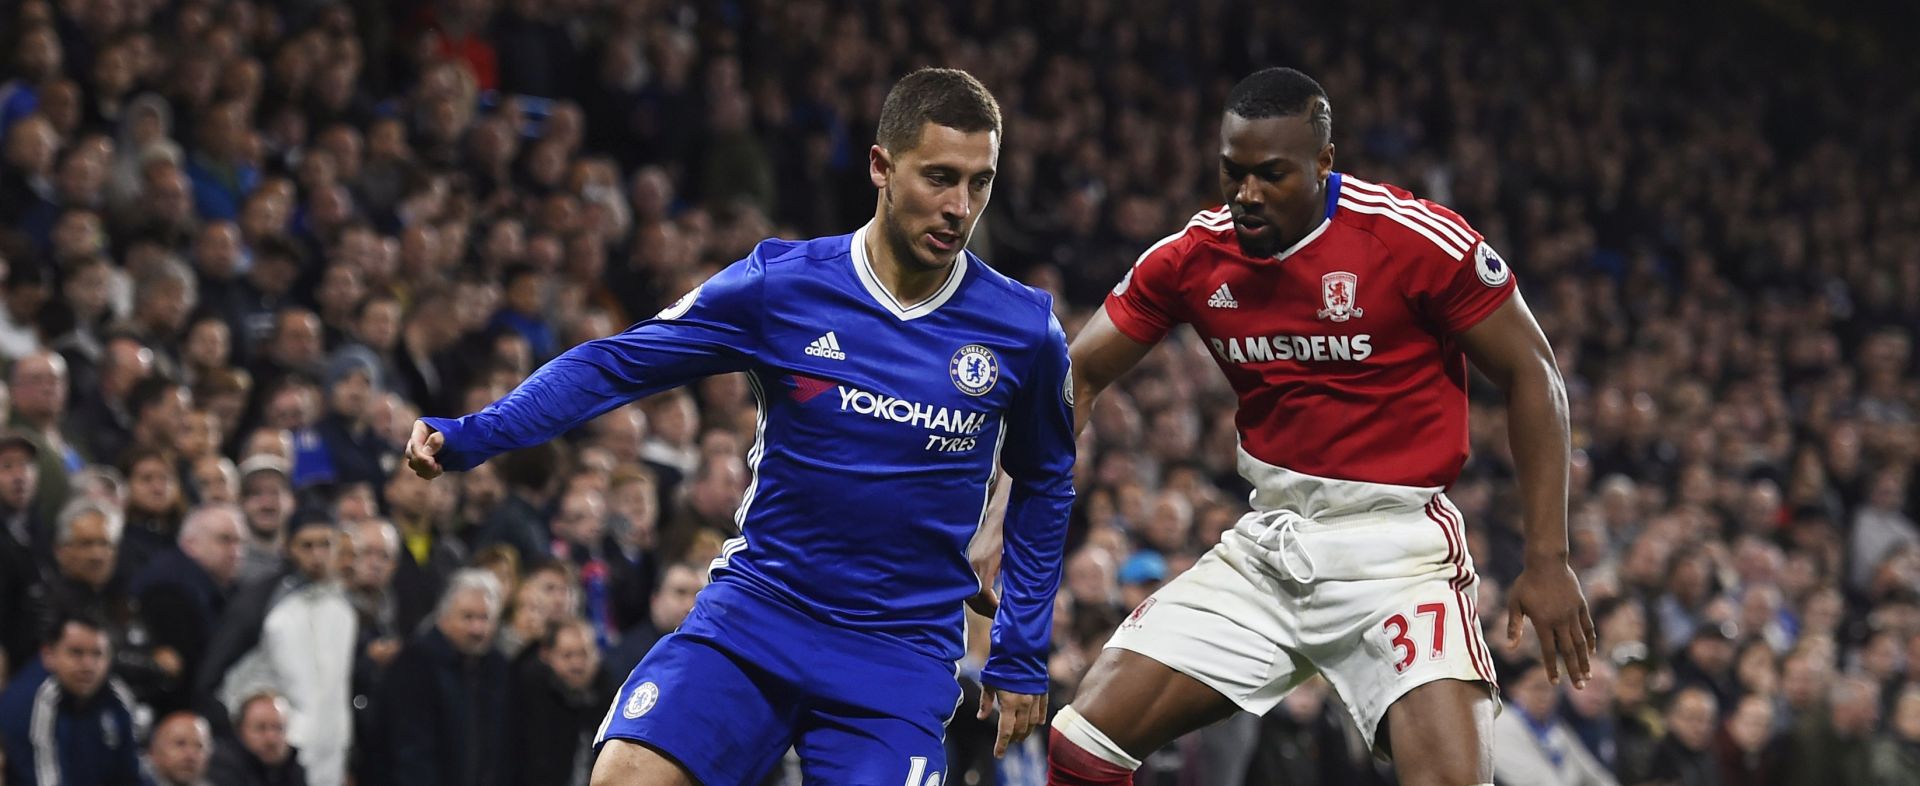 epa05951478 Chelsea's Eden Hazard (L) vies for the ball against Middlesbrough's Adams Traore (R) during the English Premier League soccer match between Chelsea FC and Middlesborough FC at Stamford Bridge in London, Britain, 08 May 2017.  EPA/WILL OLIVER EDITORIAL USE ONLY. No use with unauthorized audio, video, data, fixture lists, club/league logos or 'live' service. Online in-match use limited to 75 images, no video emulation. No use in betting, games or single club/league/player publications.